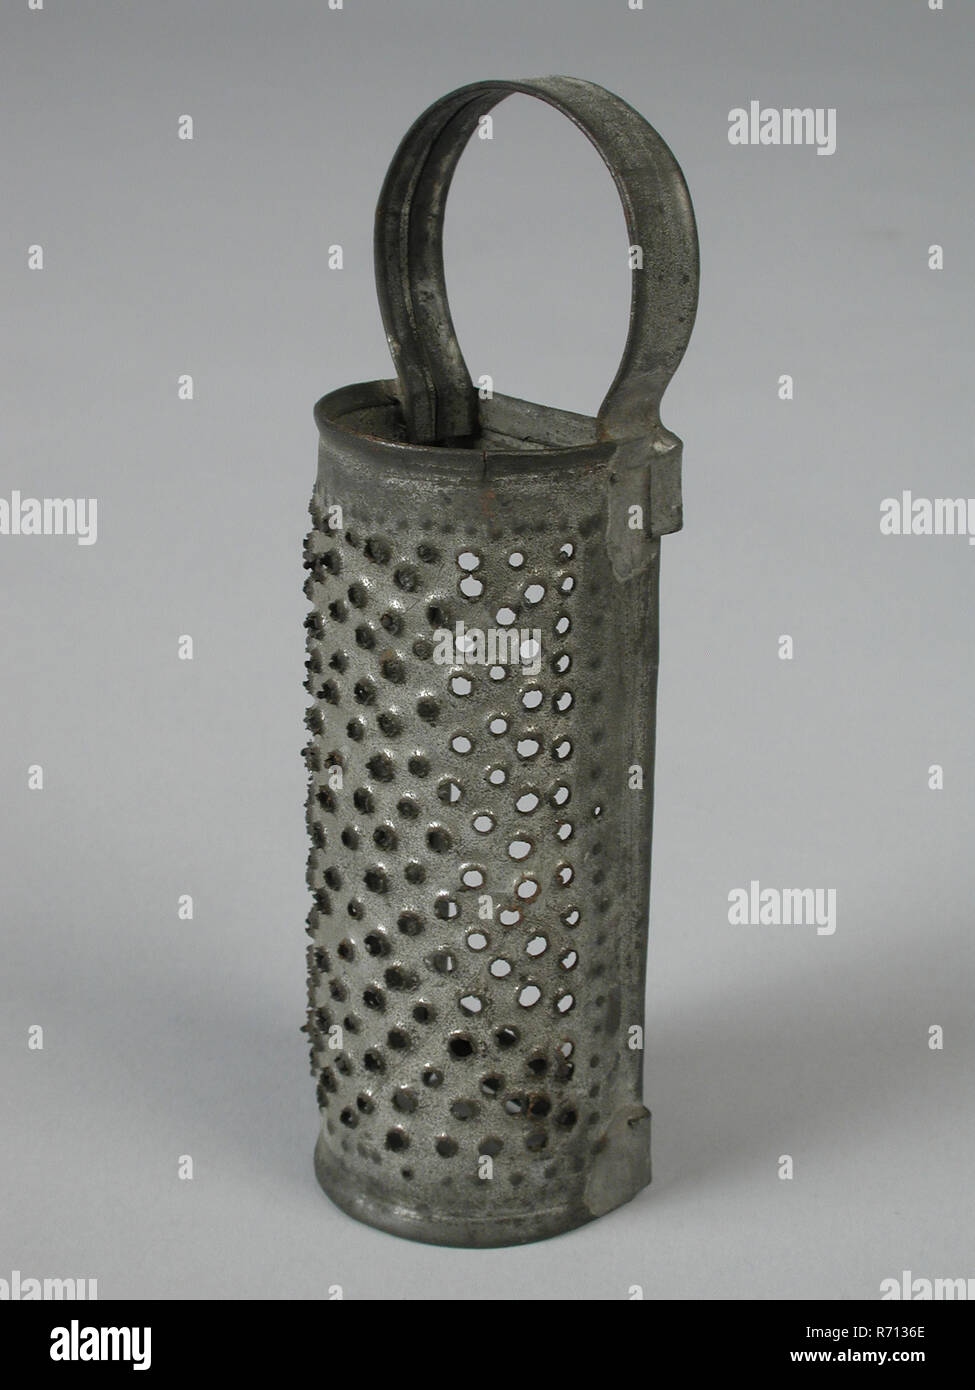 metal worker: Gresnich, Cans miniature grater, rasp kitchenware miniature  toy relaxant model metal, curved soldered tinned tin Elongated round bent  perforated half cylinder with rough holes Bottom at two places transversely  connected.